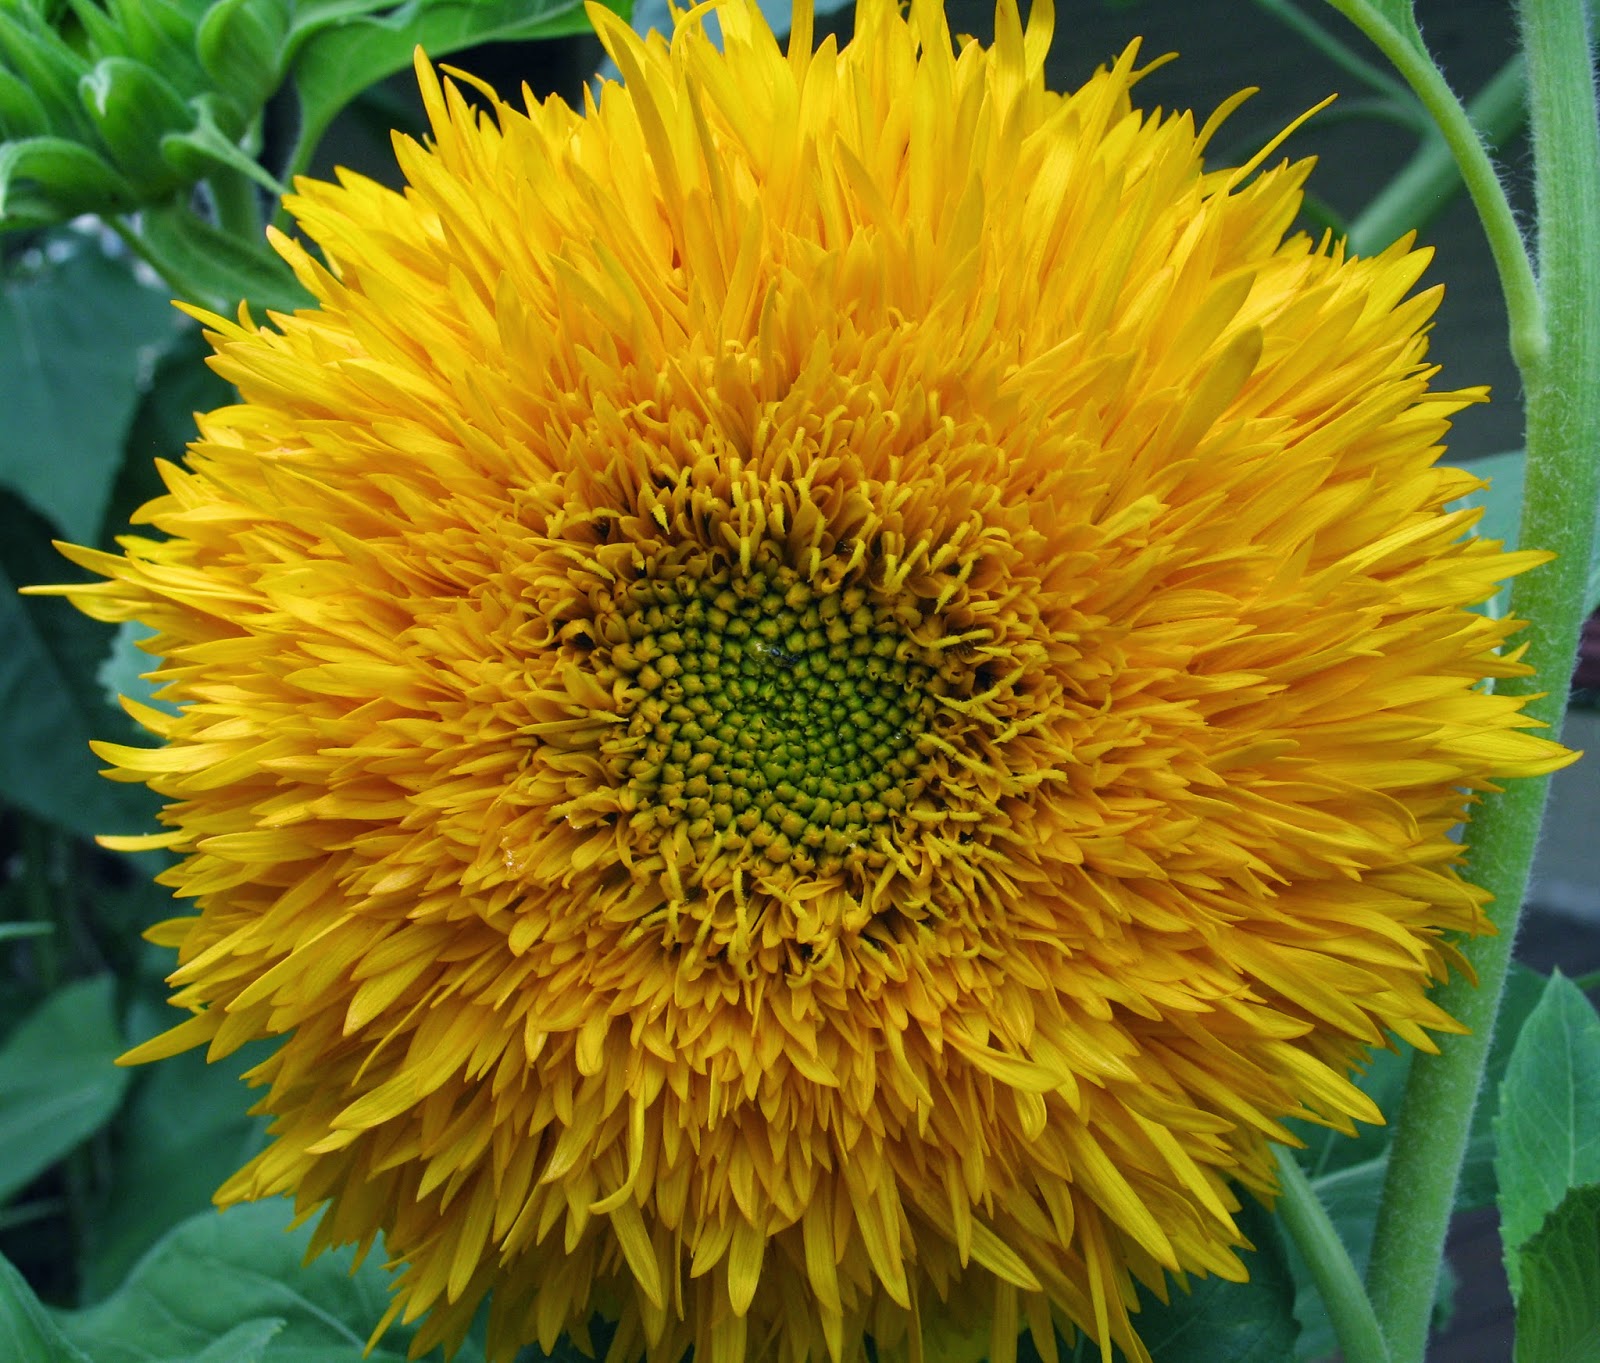 How many petals does a sunflower have?